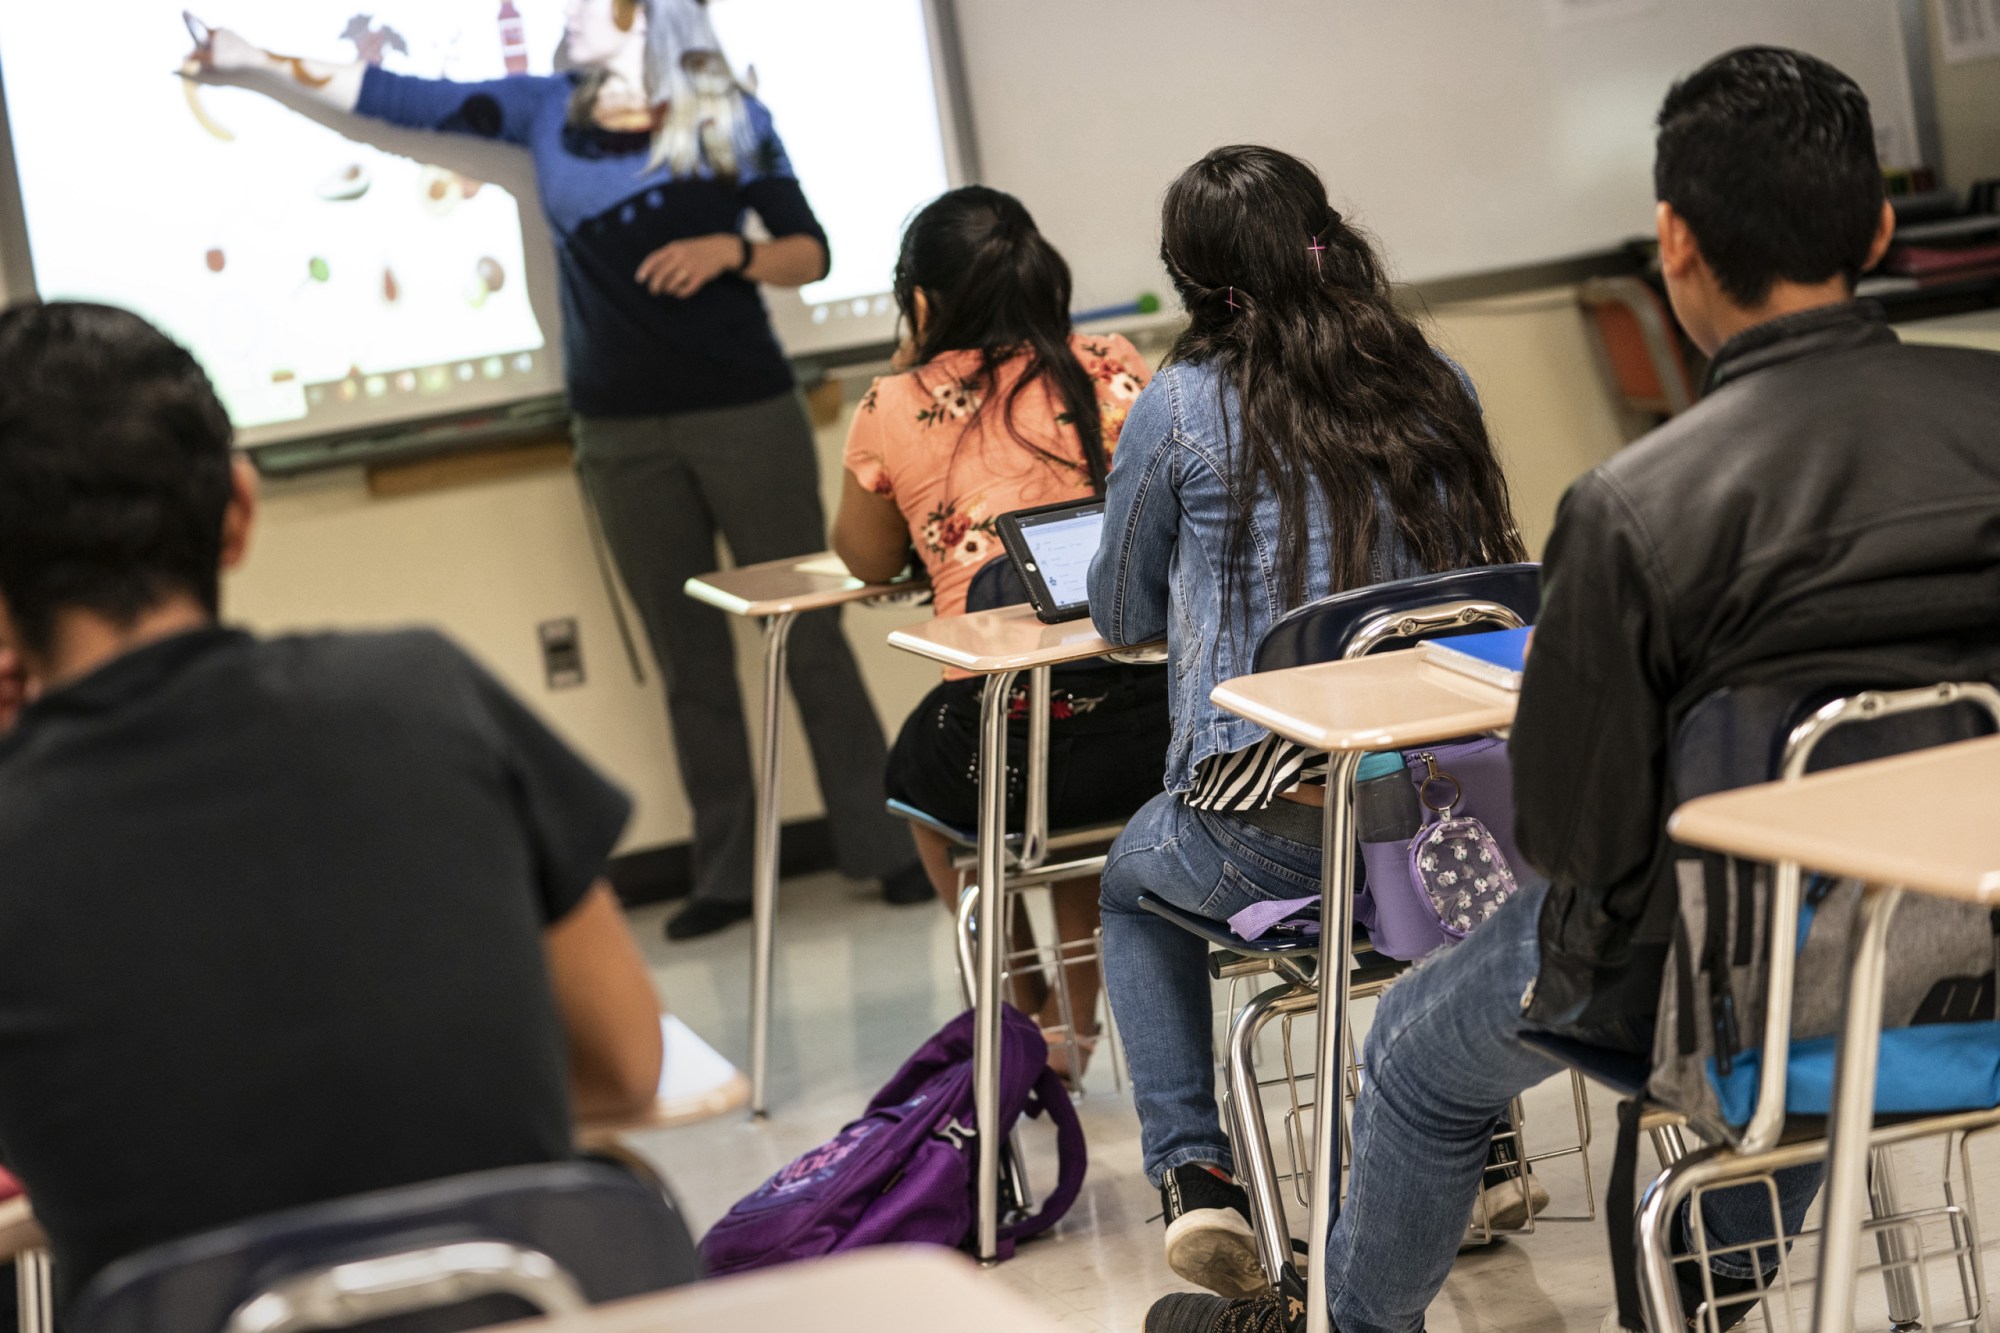 WORTHINGTON, MN - SEPTEMBER 5: Students engage in a vocabulary lesson in a newcomers ESL class at Worthington High School in Worthington Minn., September 5, 2019. There are around seven ESL classes going on per period to cover the need for new student arrivals. (Photo by Courtney Perry/For the Washington Post)